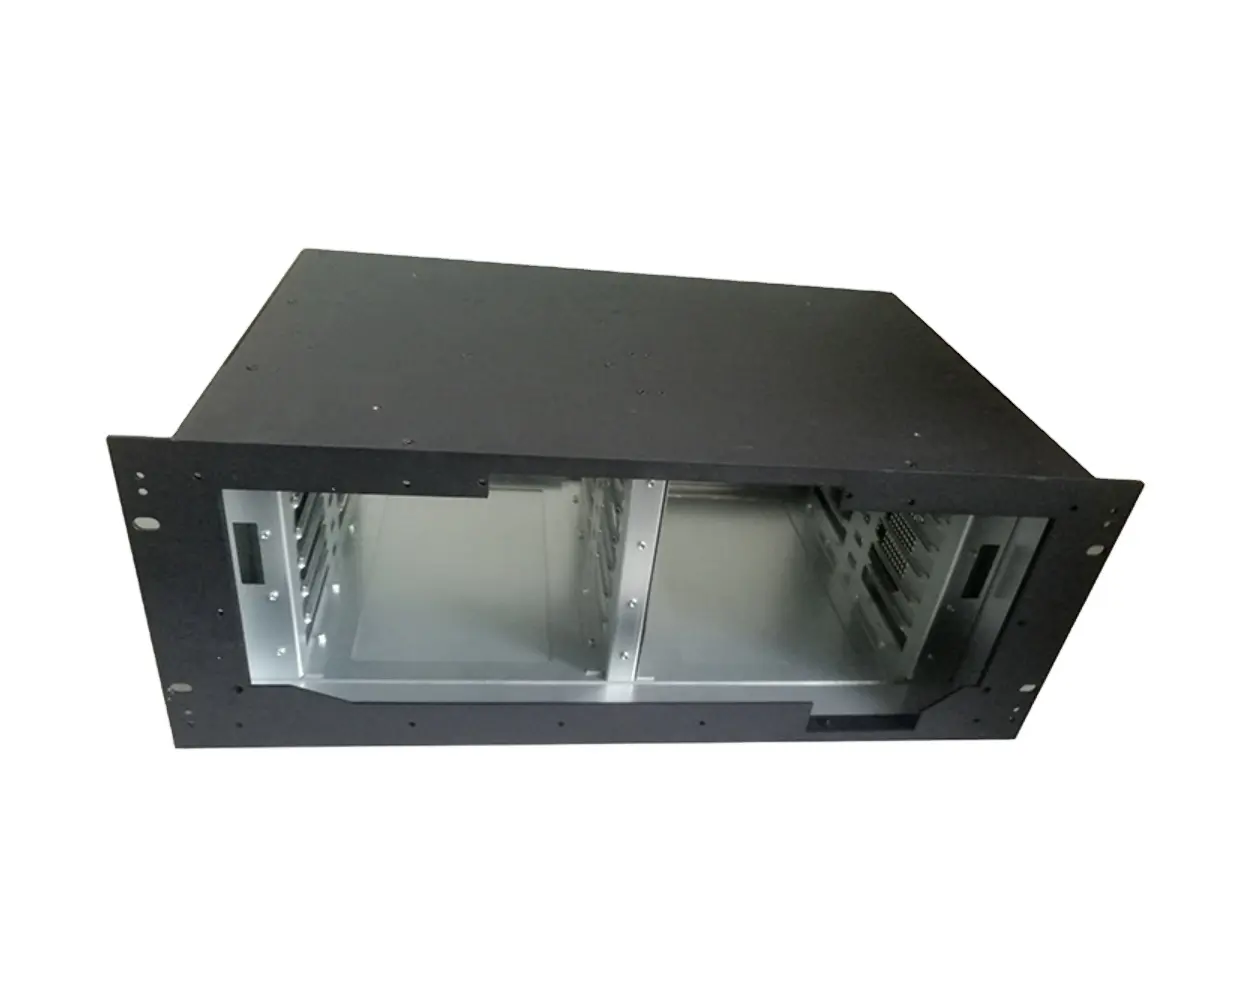 4u short jbod chassis 16 bay server and network smart cabinet 4u rack mounting chassis